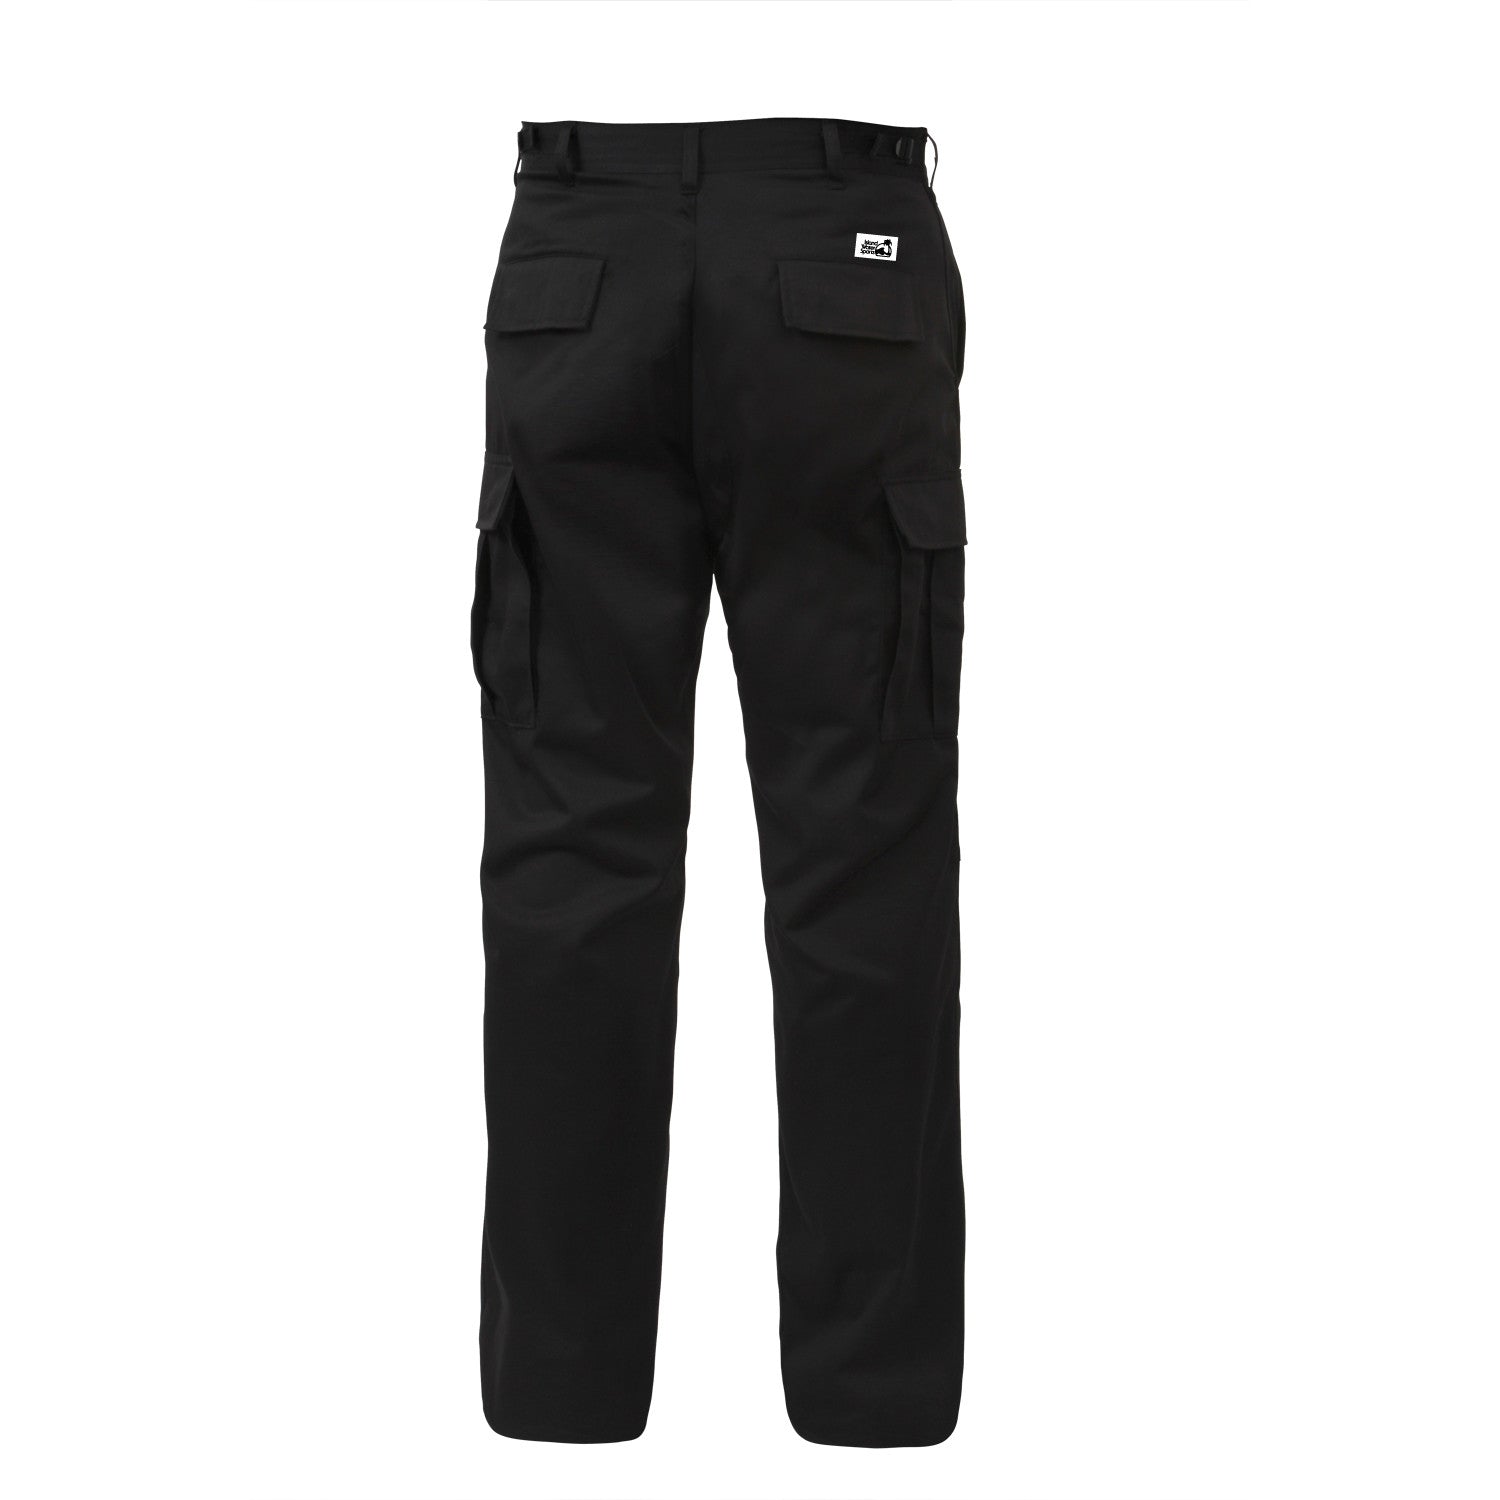 Rothco Relaxed Fit Zipper Fly BDU Pants Black M